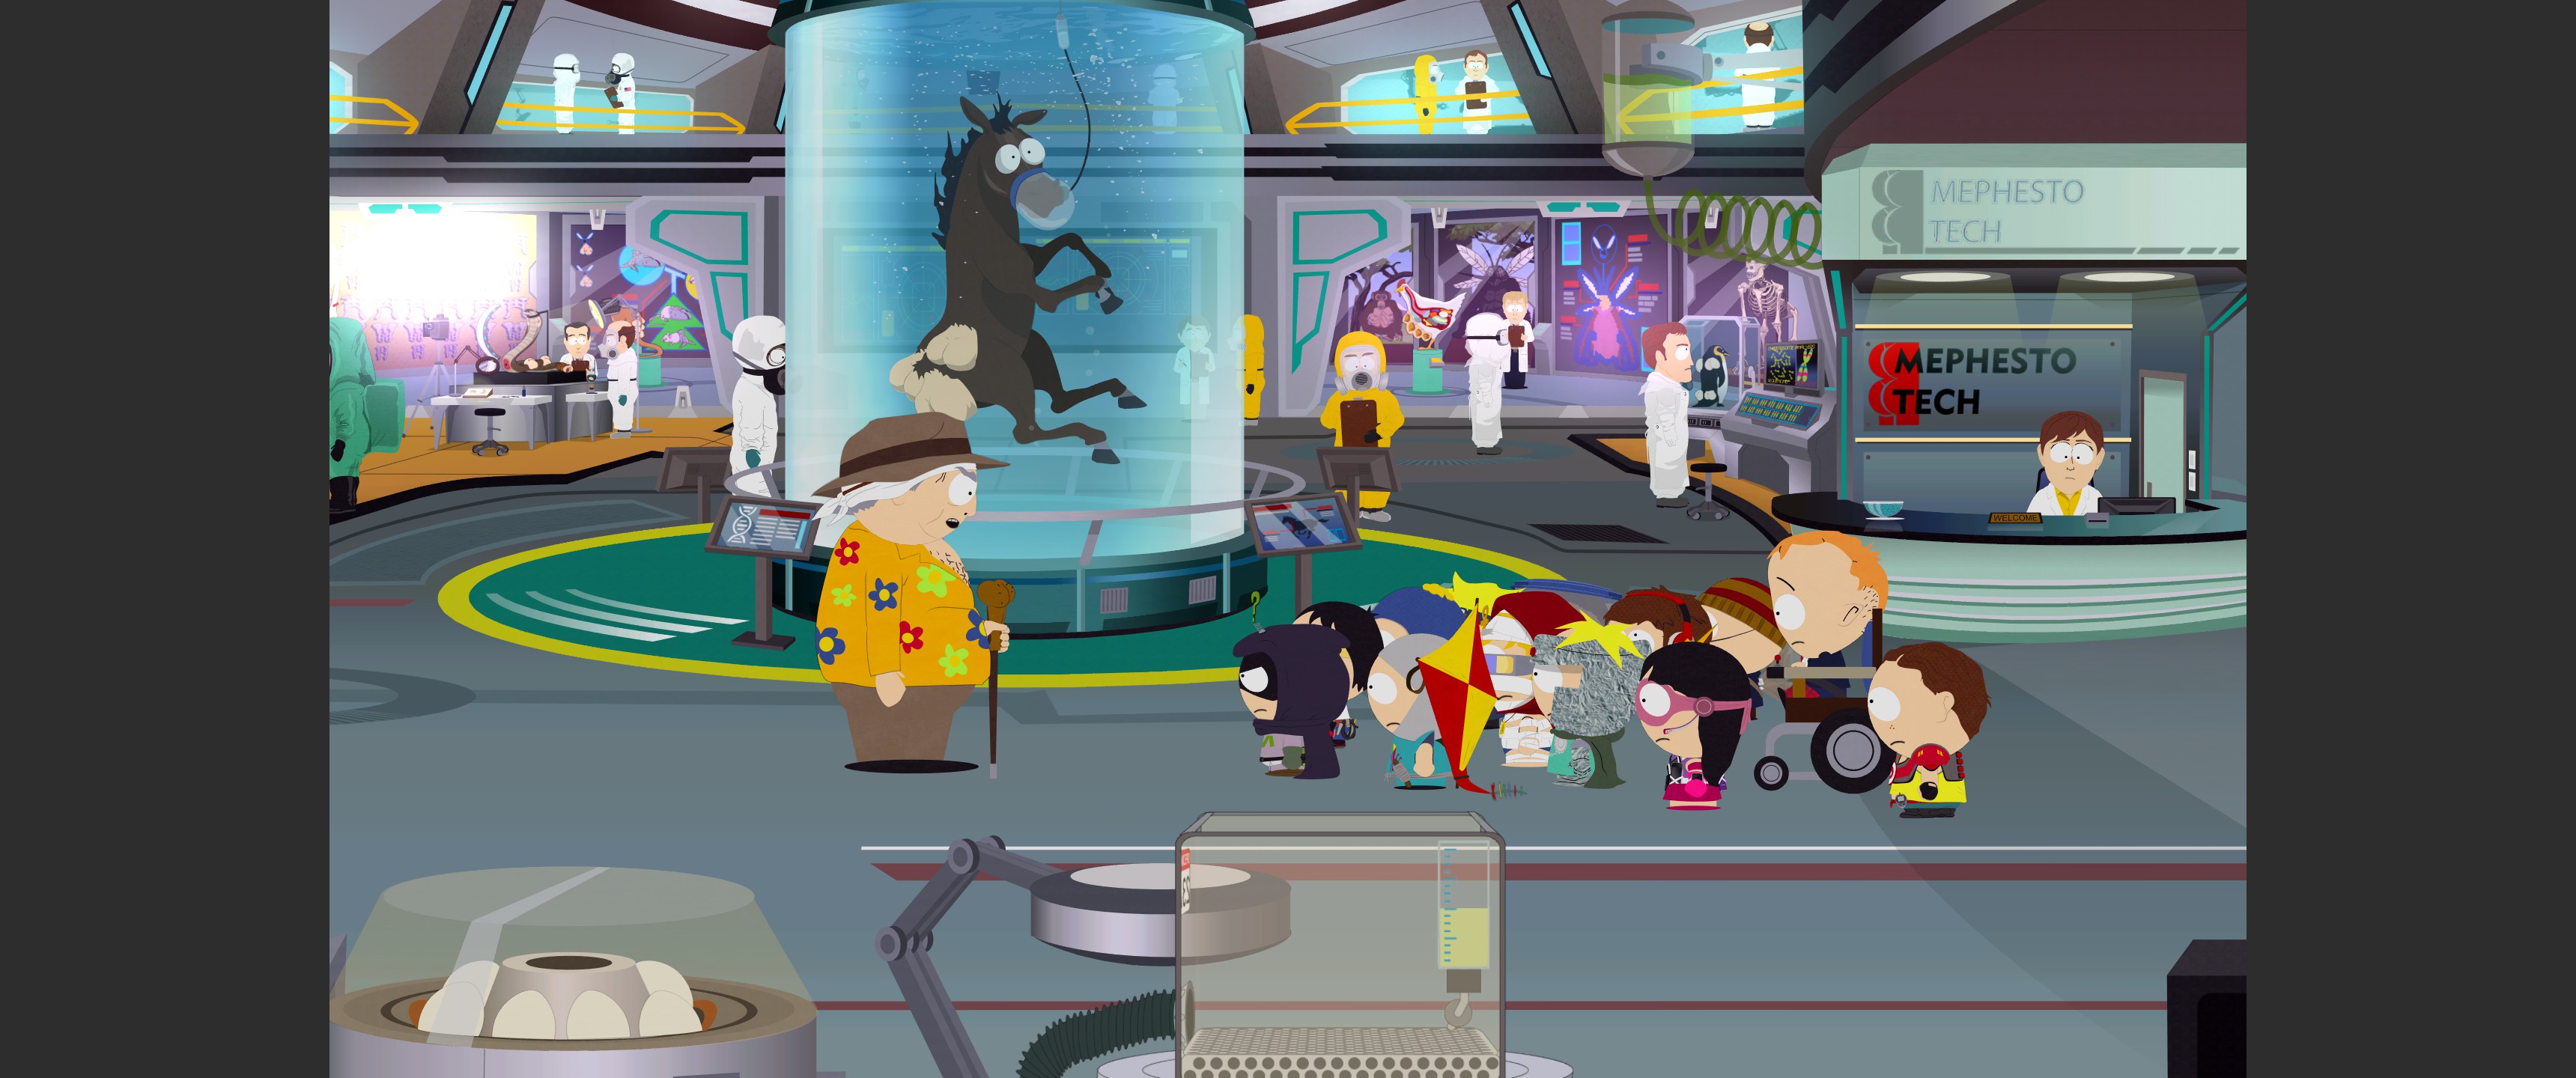 south park the fractured but whole dlc free download